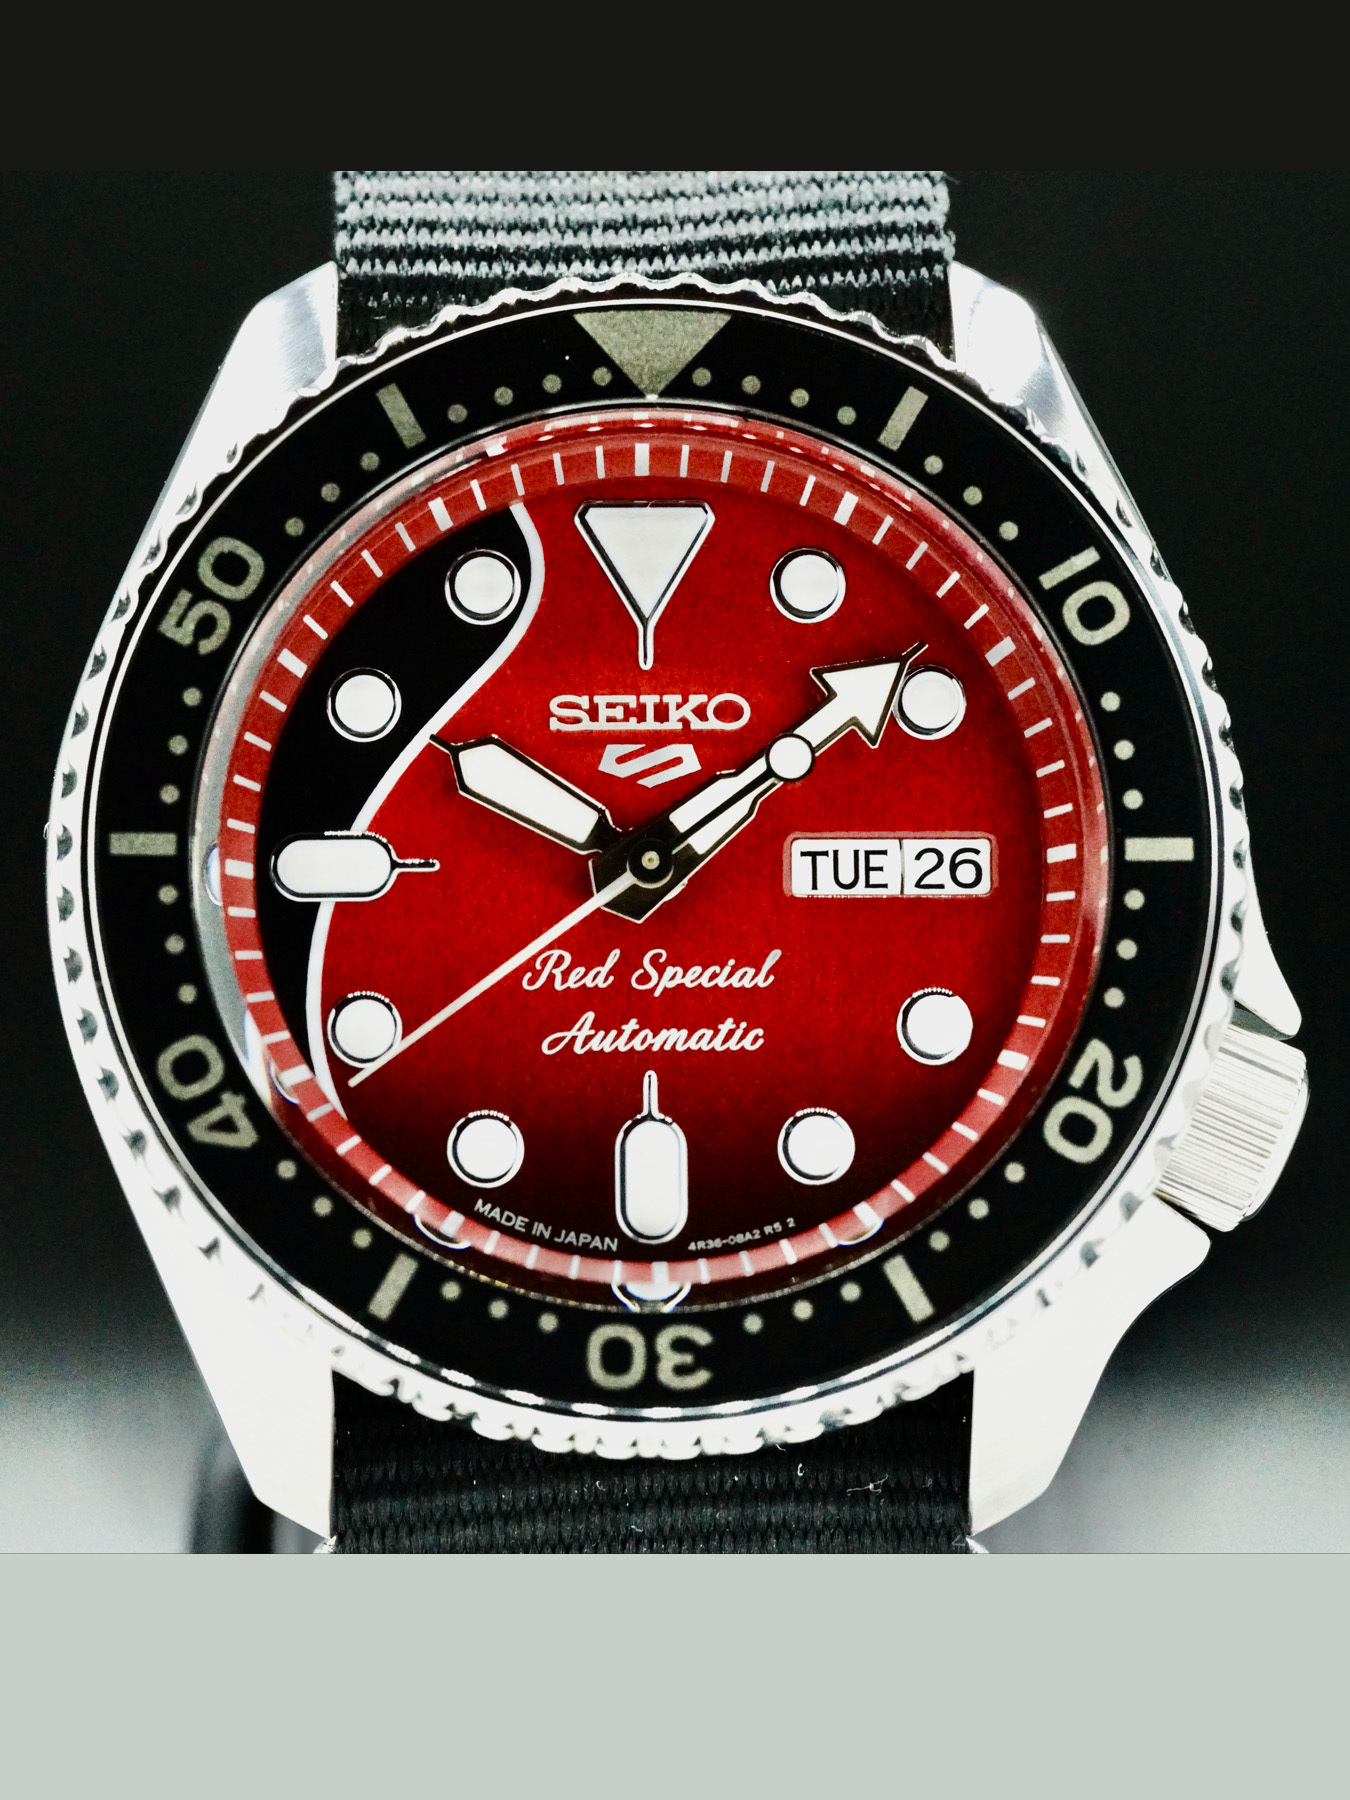 Seiko 5 Sports SRPE83 Brian May Limited Edition - Exquisite Timepieces